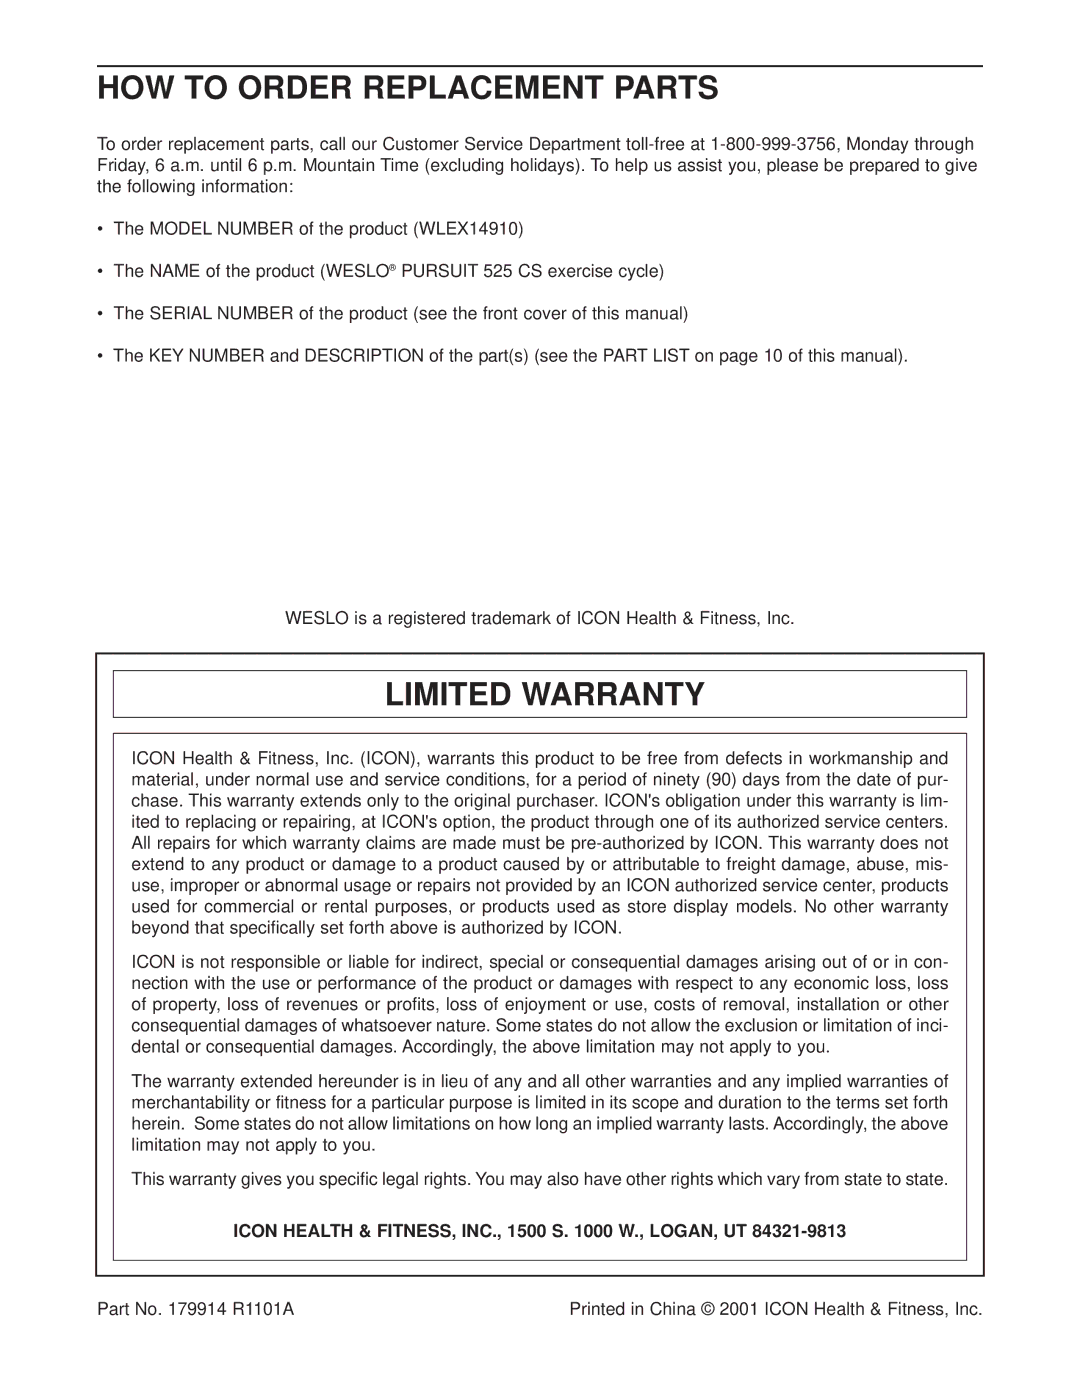 Weslo WLEX14910 HOW to Order Replacement Parts, Limited Warranty, Icon Health & FITNESS, INC., 1500 S W., LOGAN, UT 